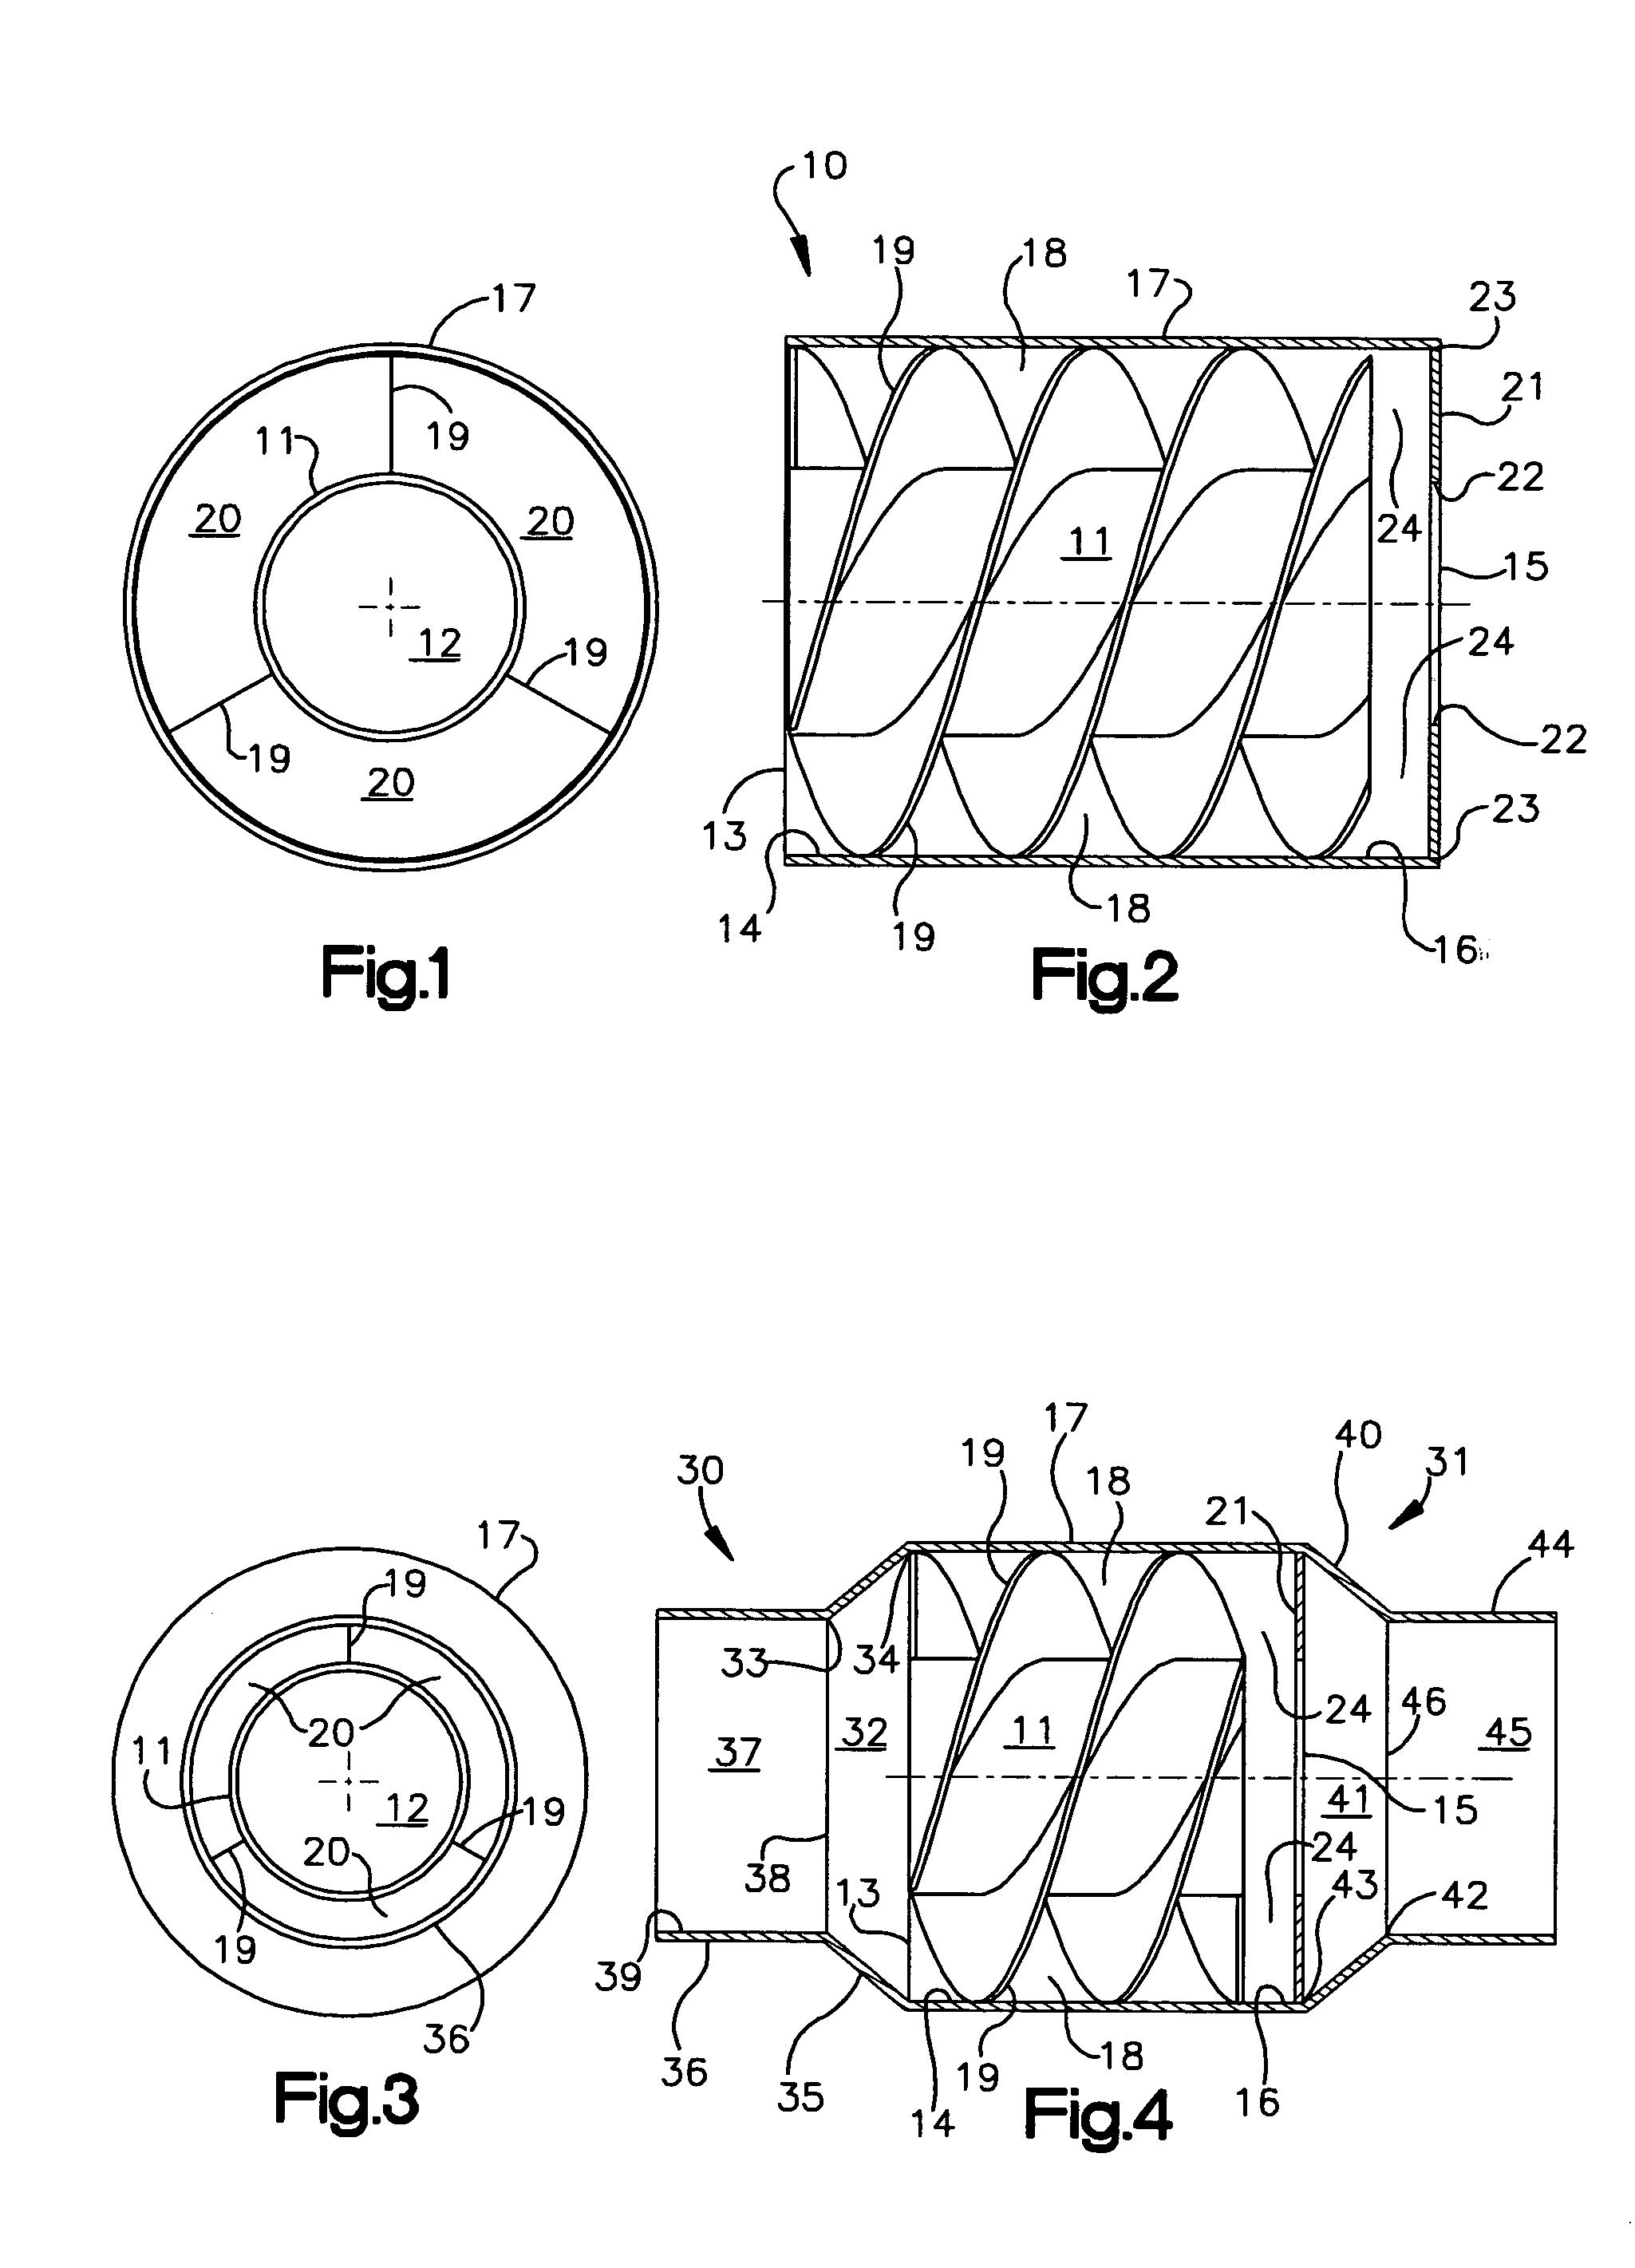 Devices for regulating pressure and flow pulses